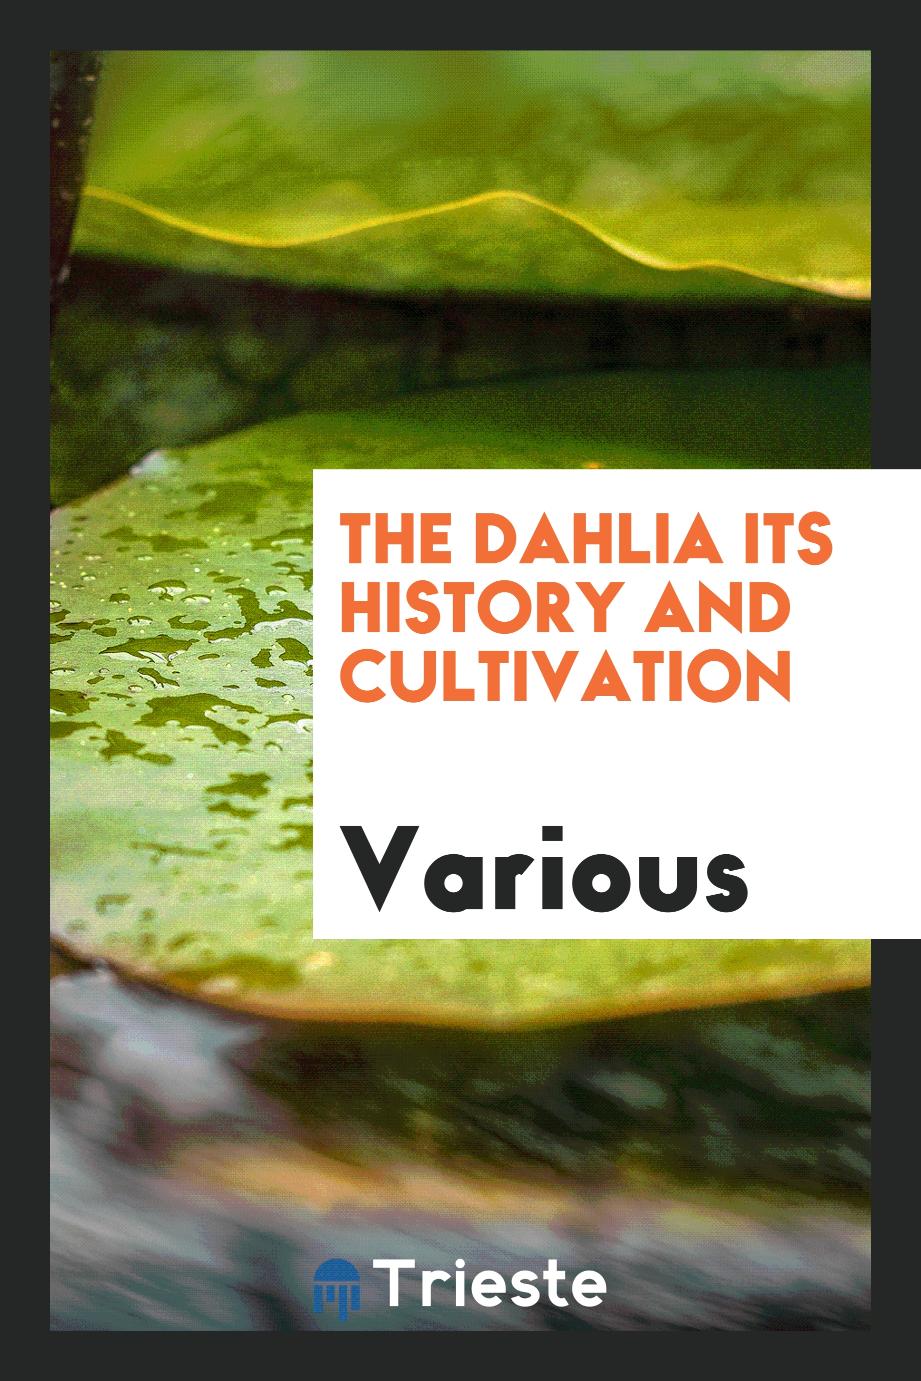 The Dahlia Its History and Cultivation